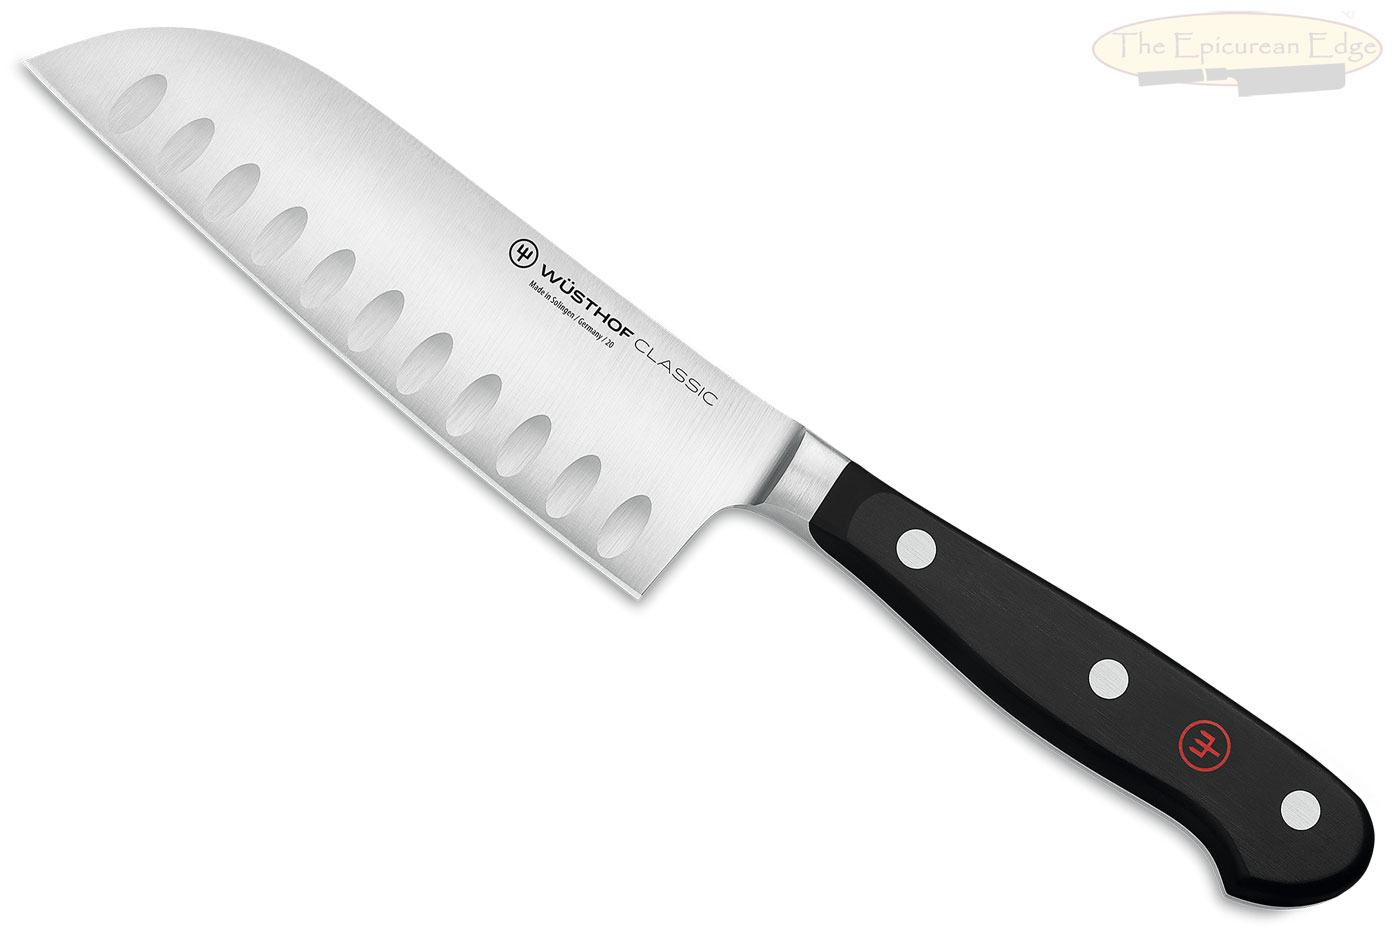 Wusthof-Trident Classic Santoku (Hollow Edge) Chef's Knife - 5 in. (1040131314)